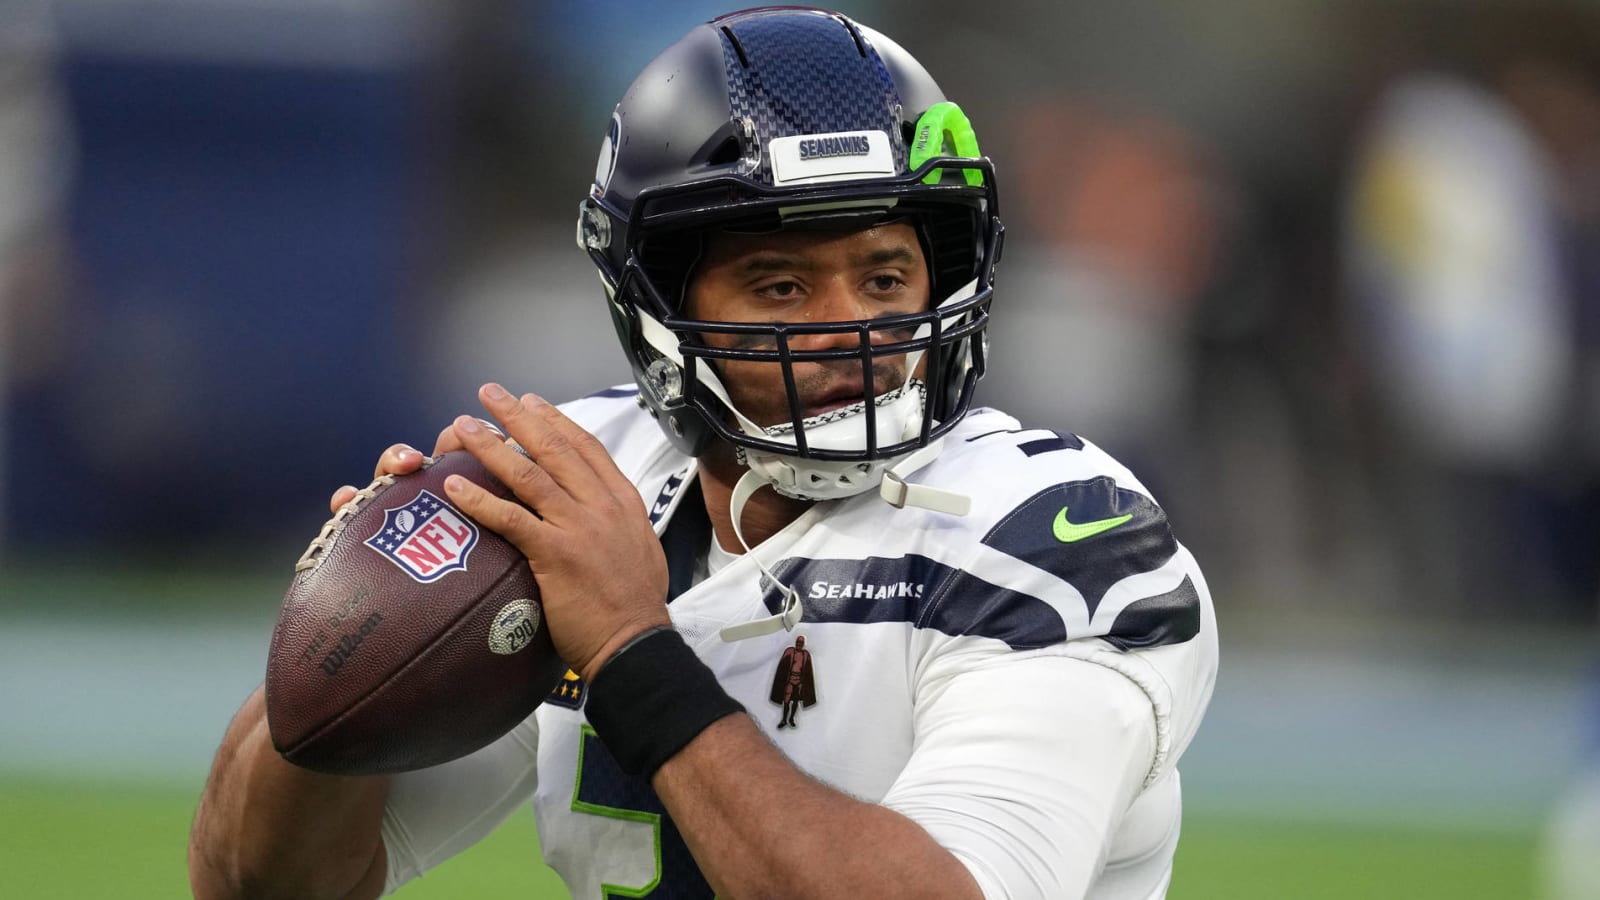 Pete Carroll says Russell Wilson is 'sore' after hurting ankle Tuesday night